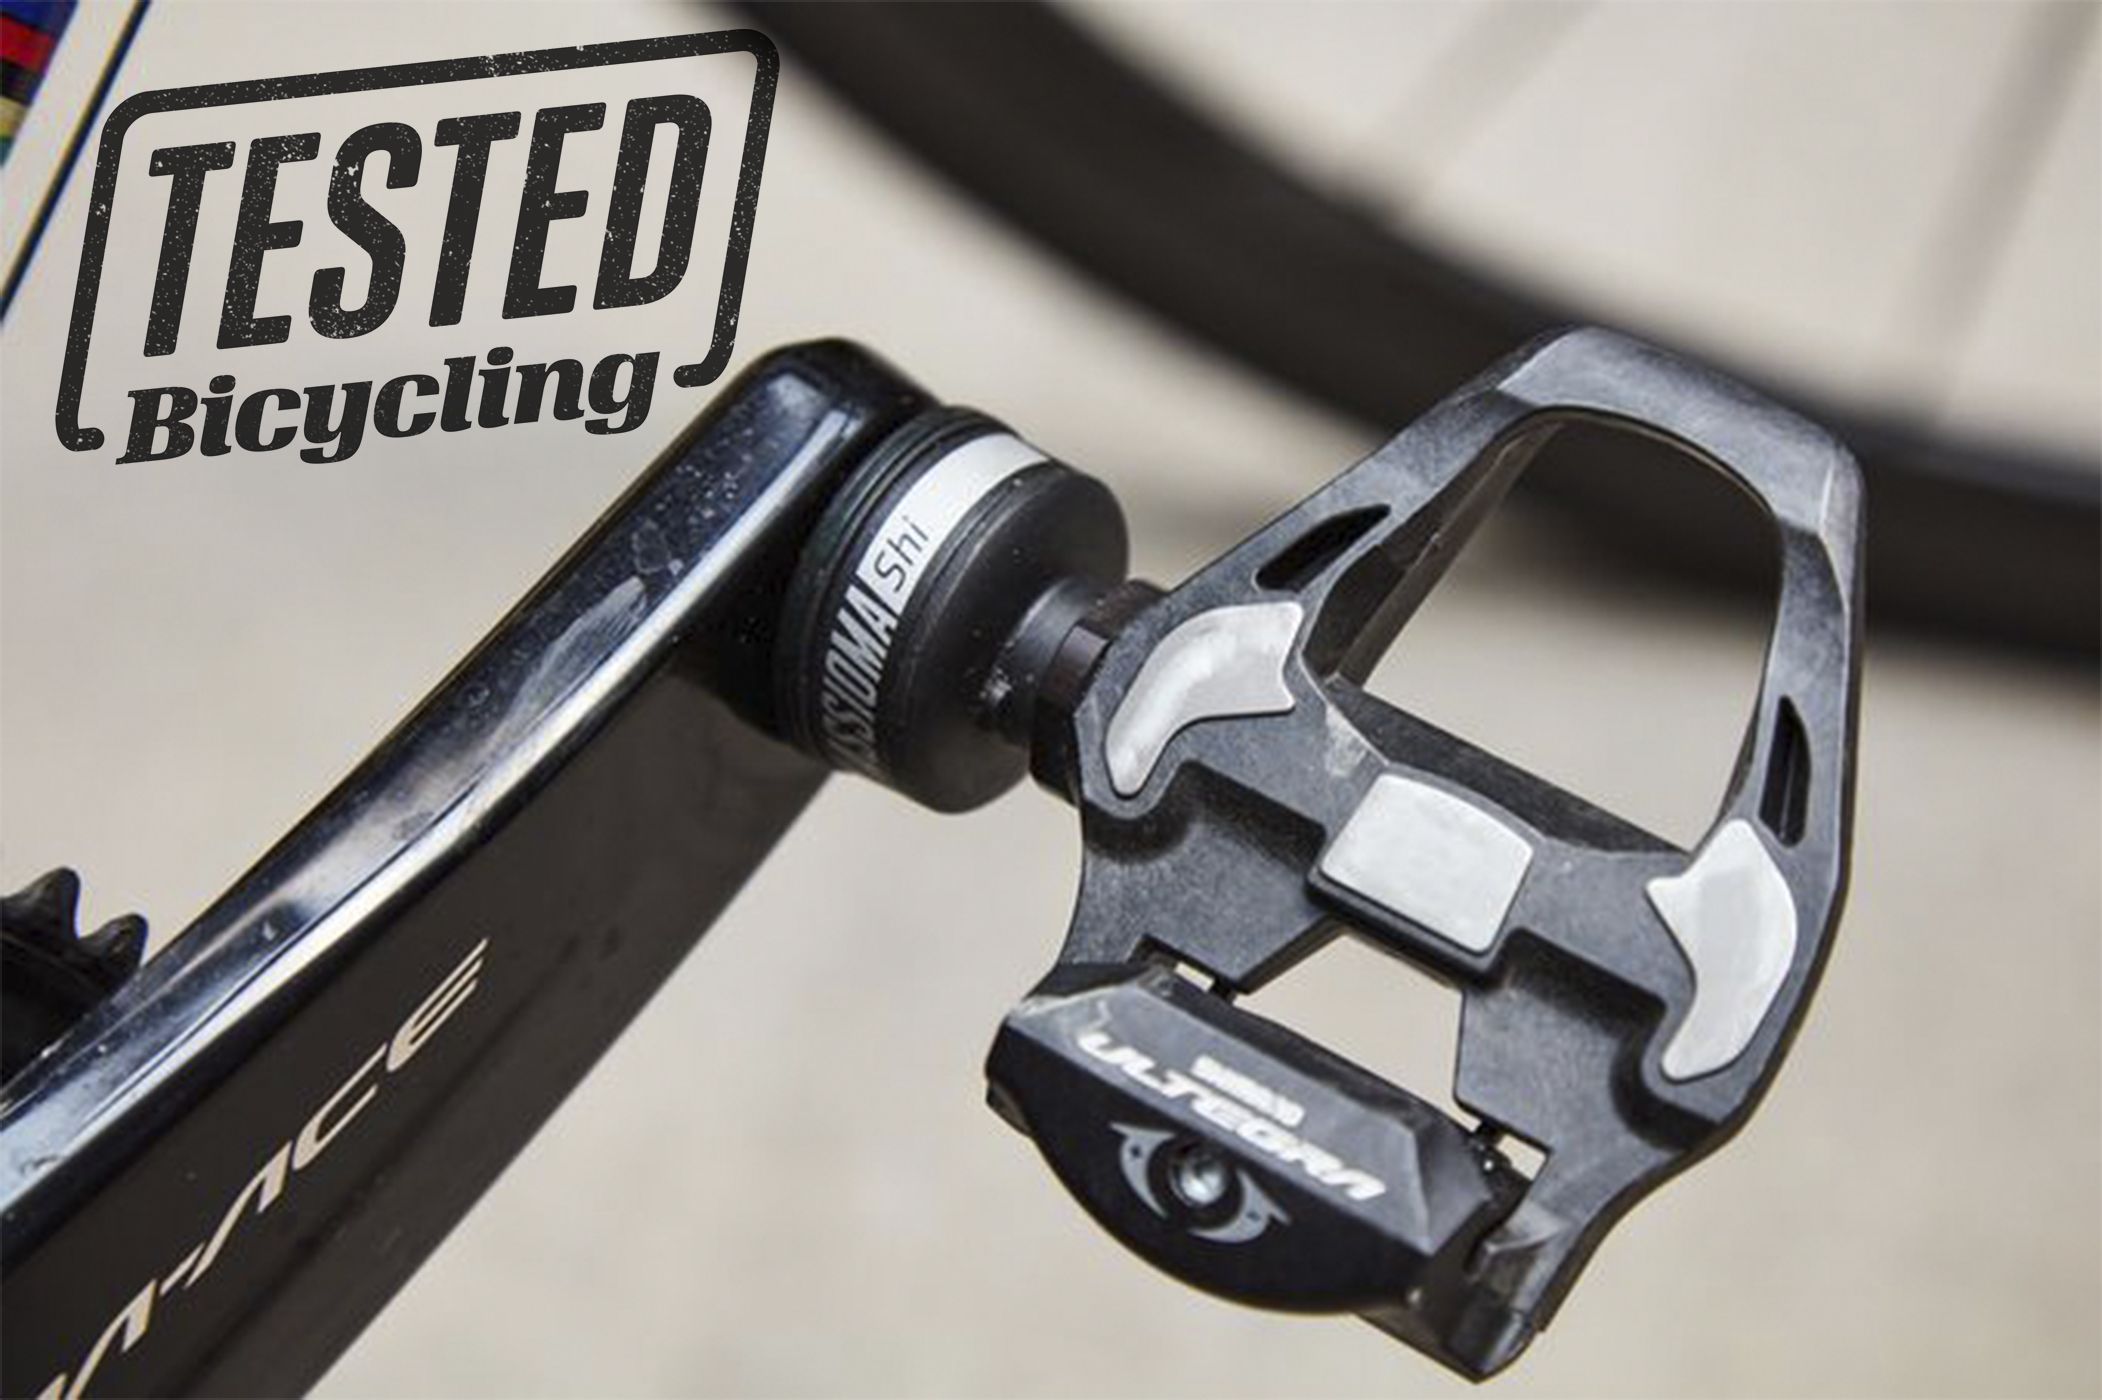 Tested: Favero Assioma Duo Shi Power Meter Pedals